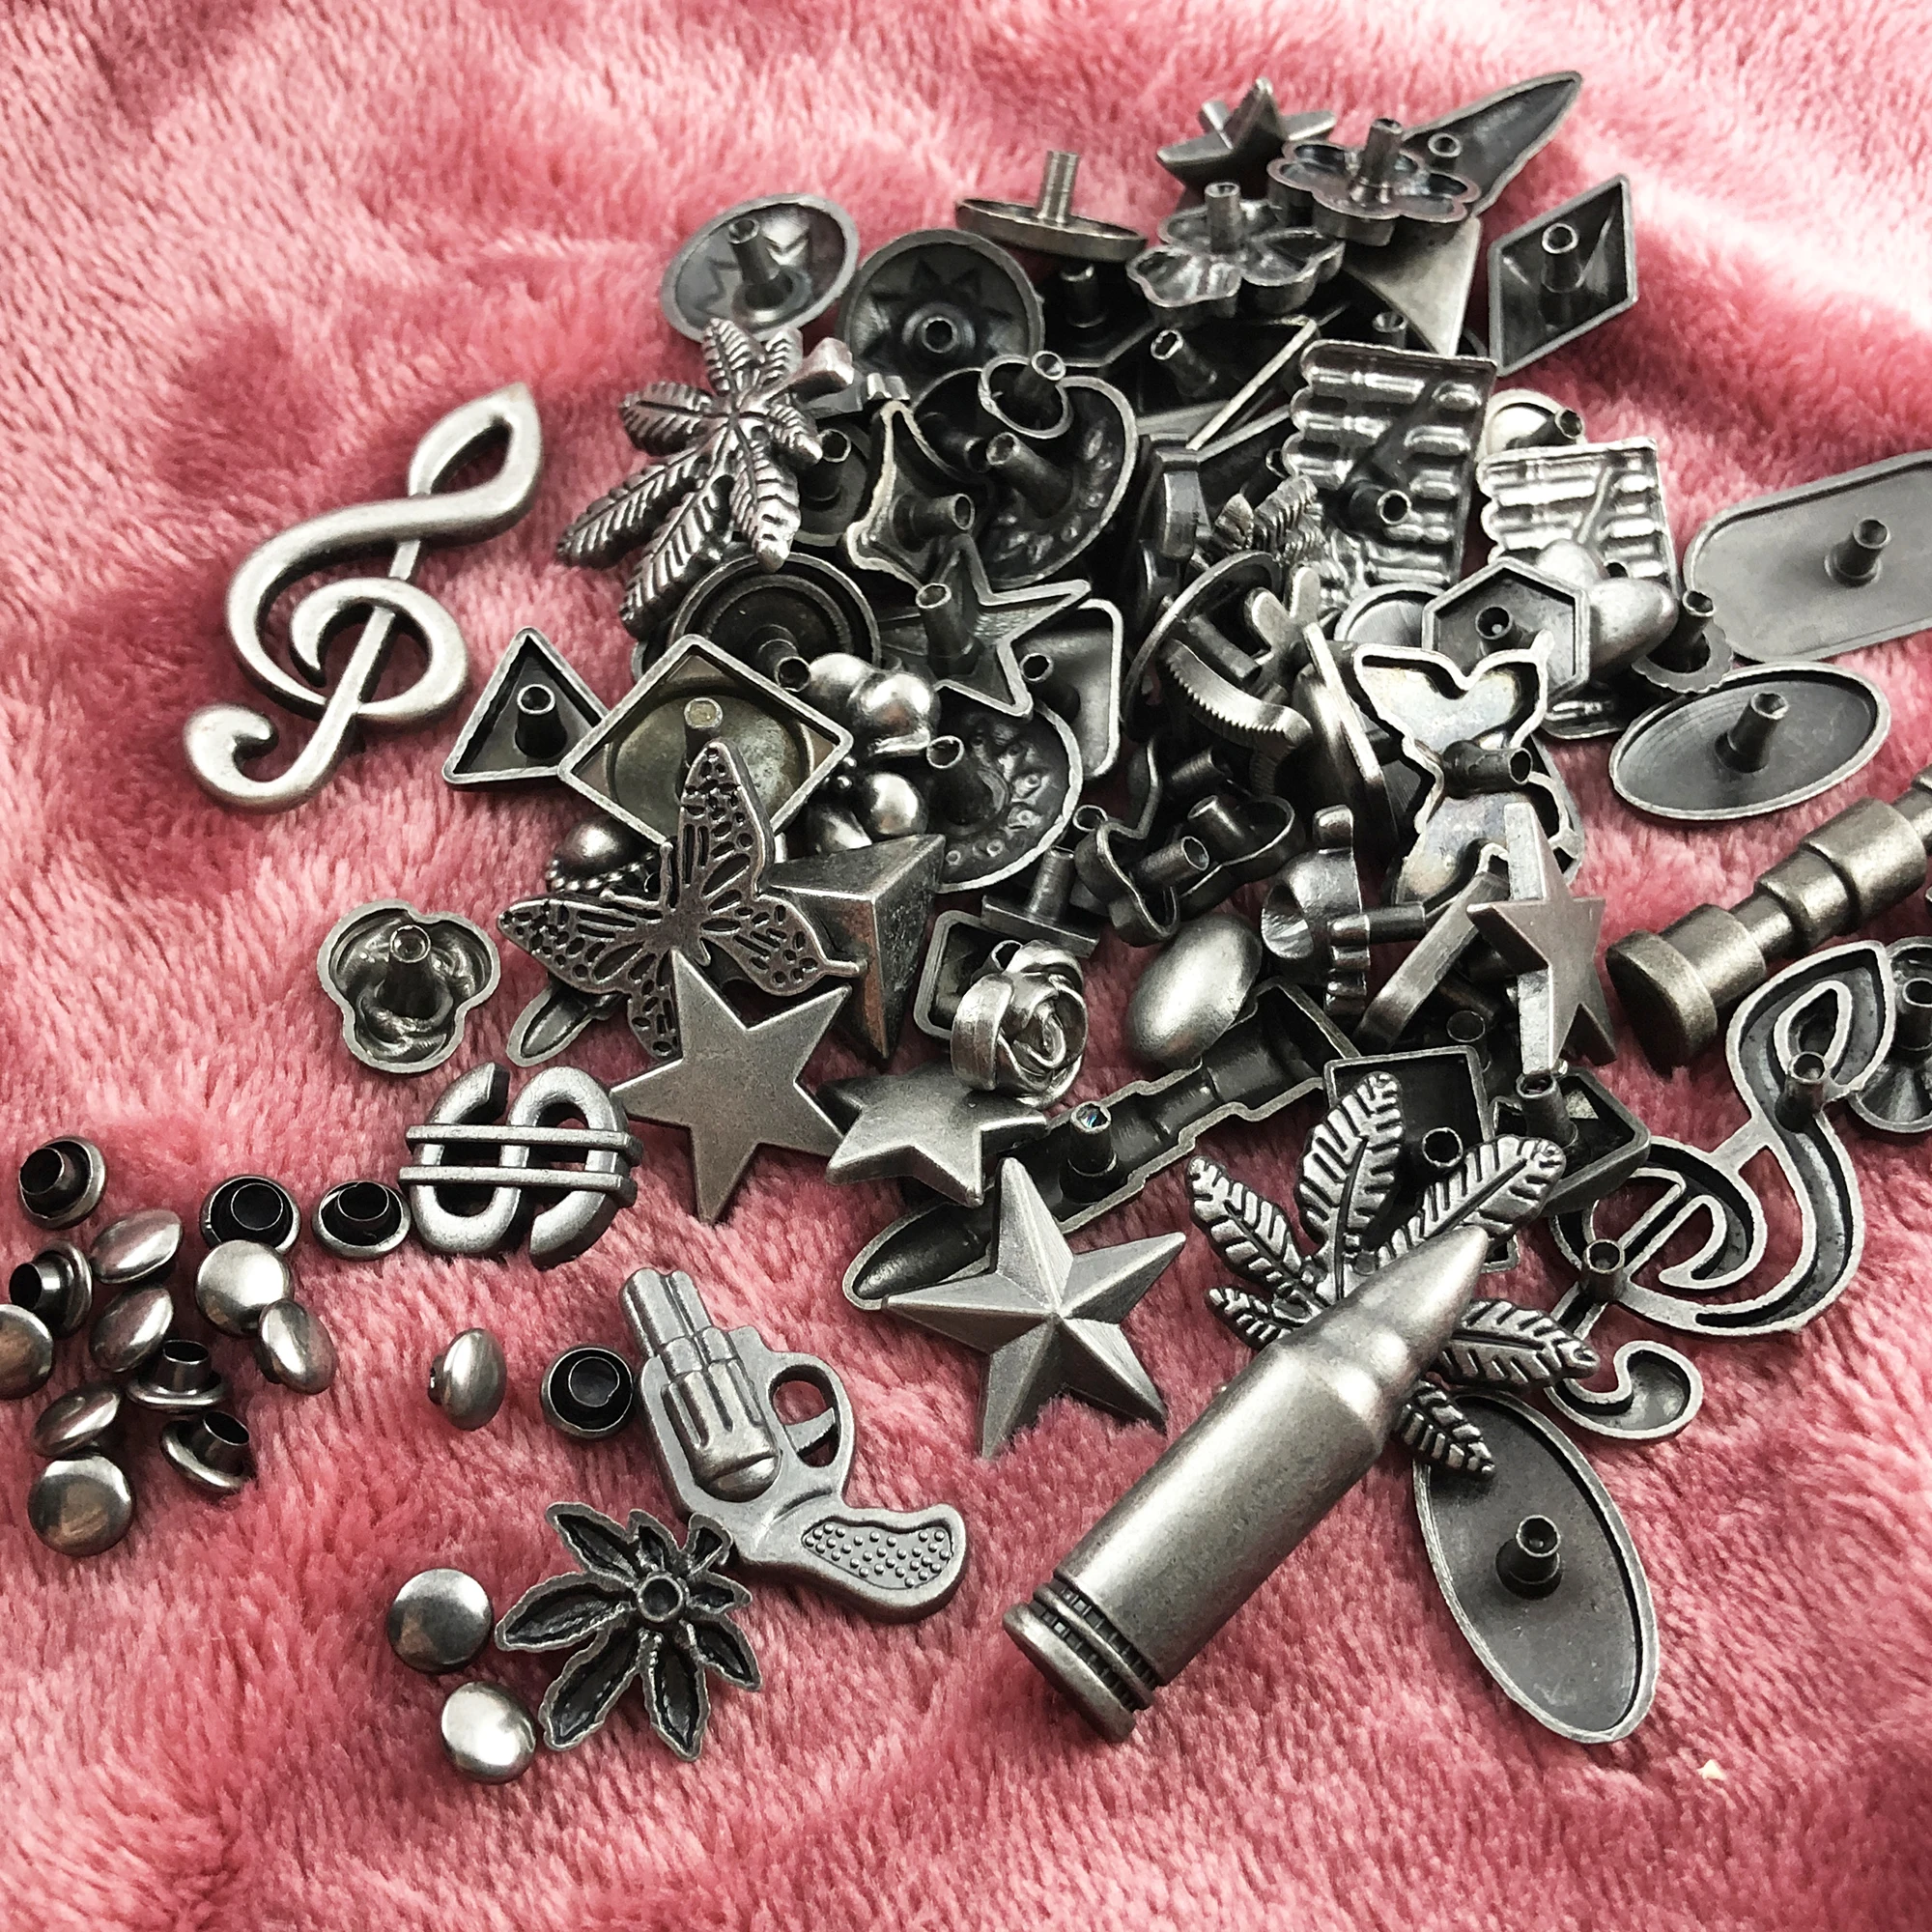 Mixed Antique Silver Plated Studs Punk Rivet Studs Leather Craft Accessories Fit For Belts Shoes Bags DIY Making Sell by Weight